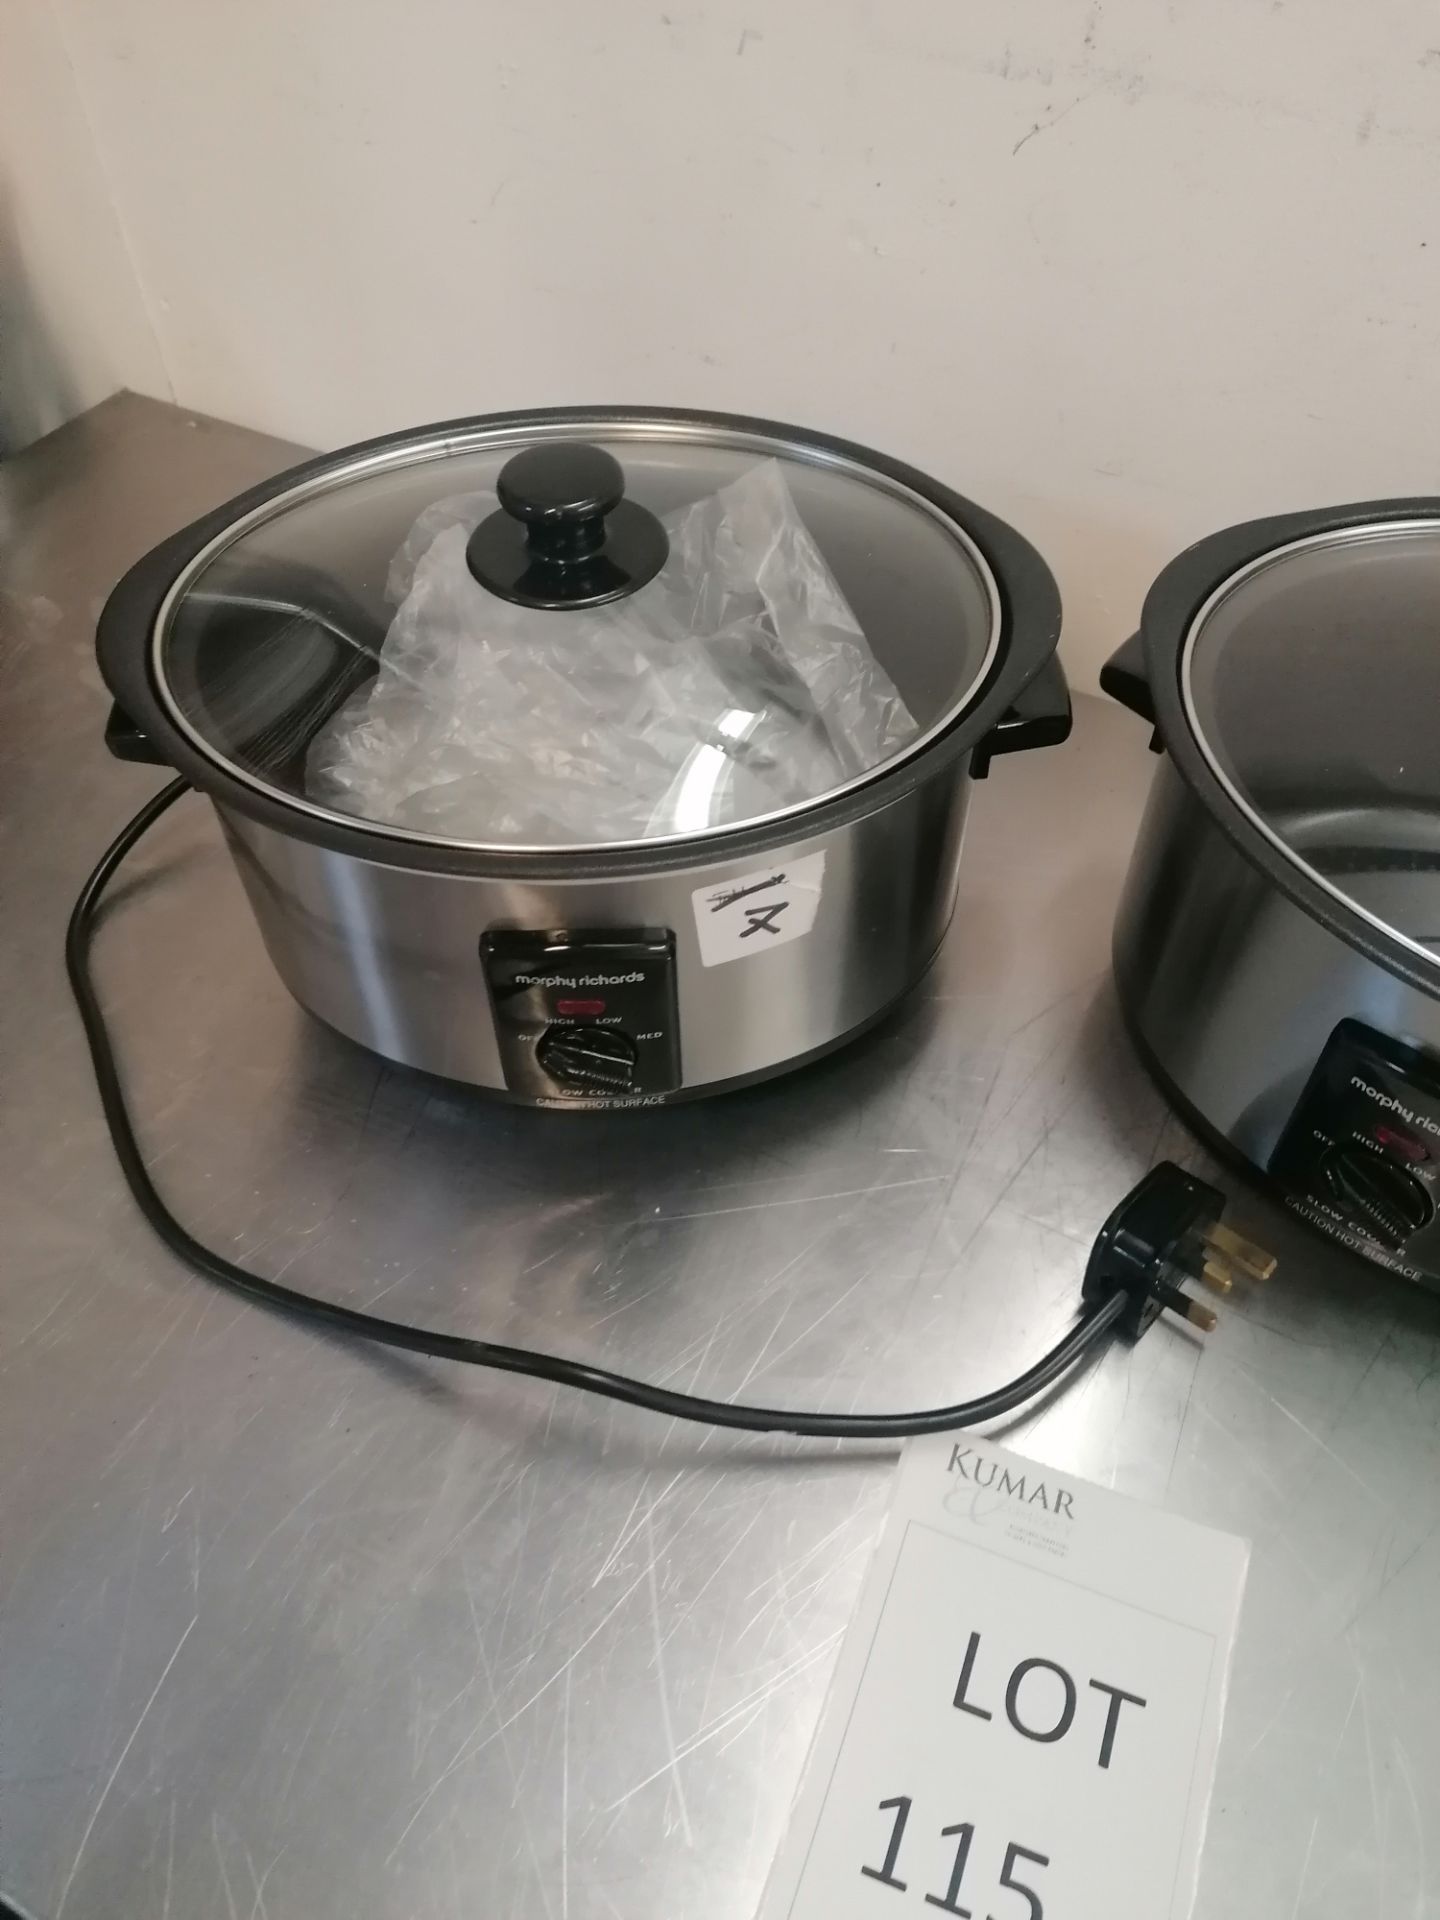 2 x Morphy richards 48701 slow cooker - Image 2 of 4